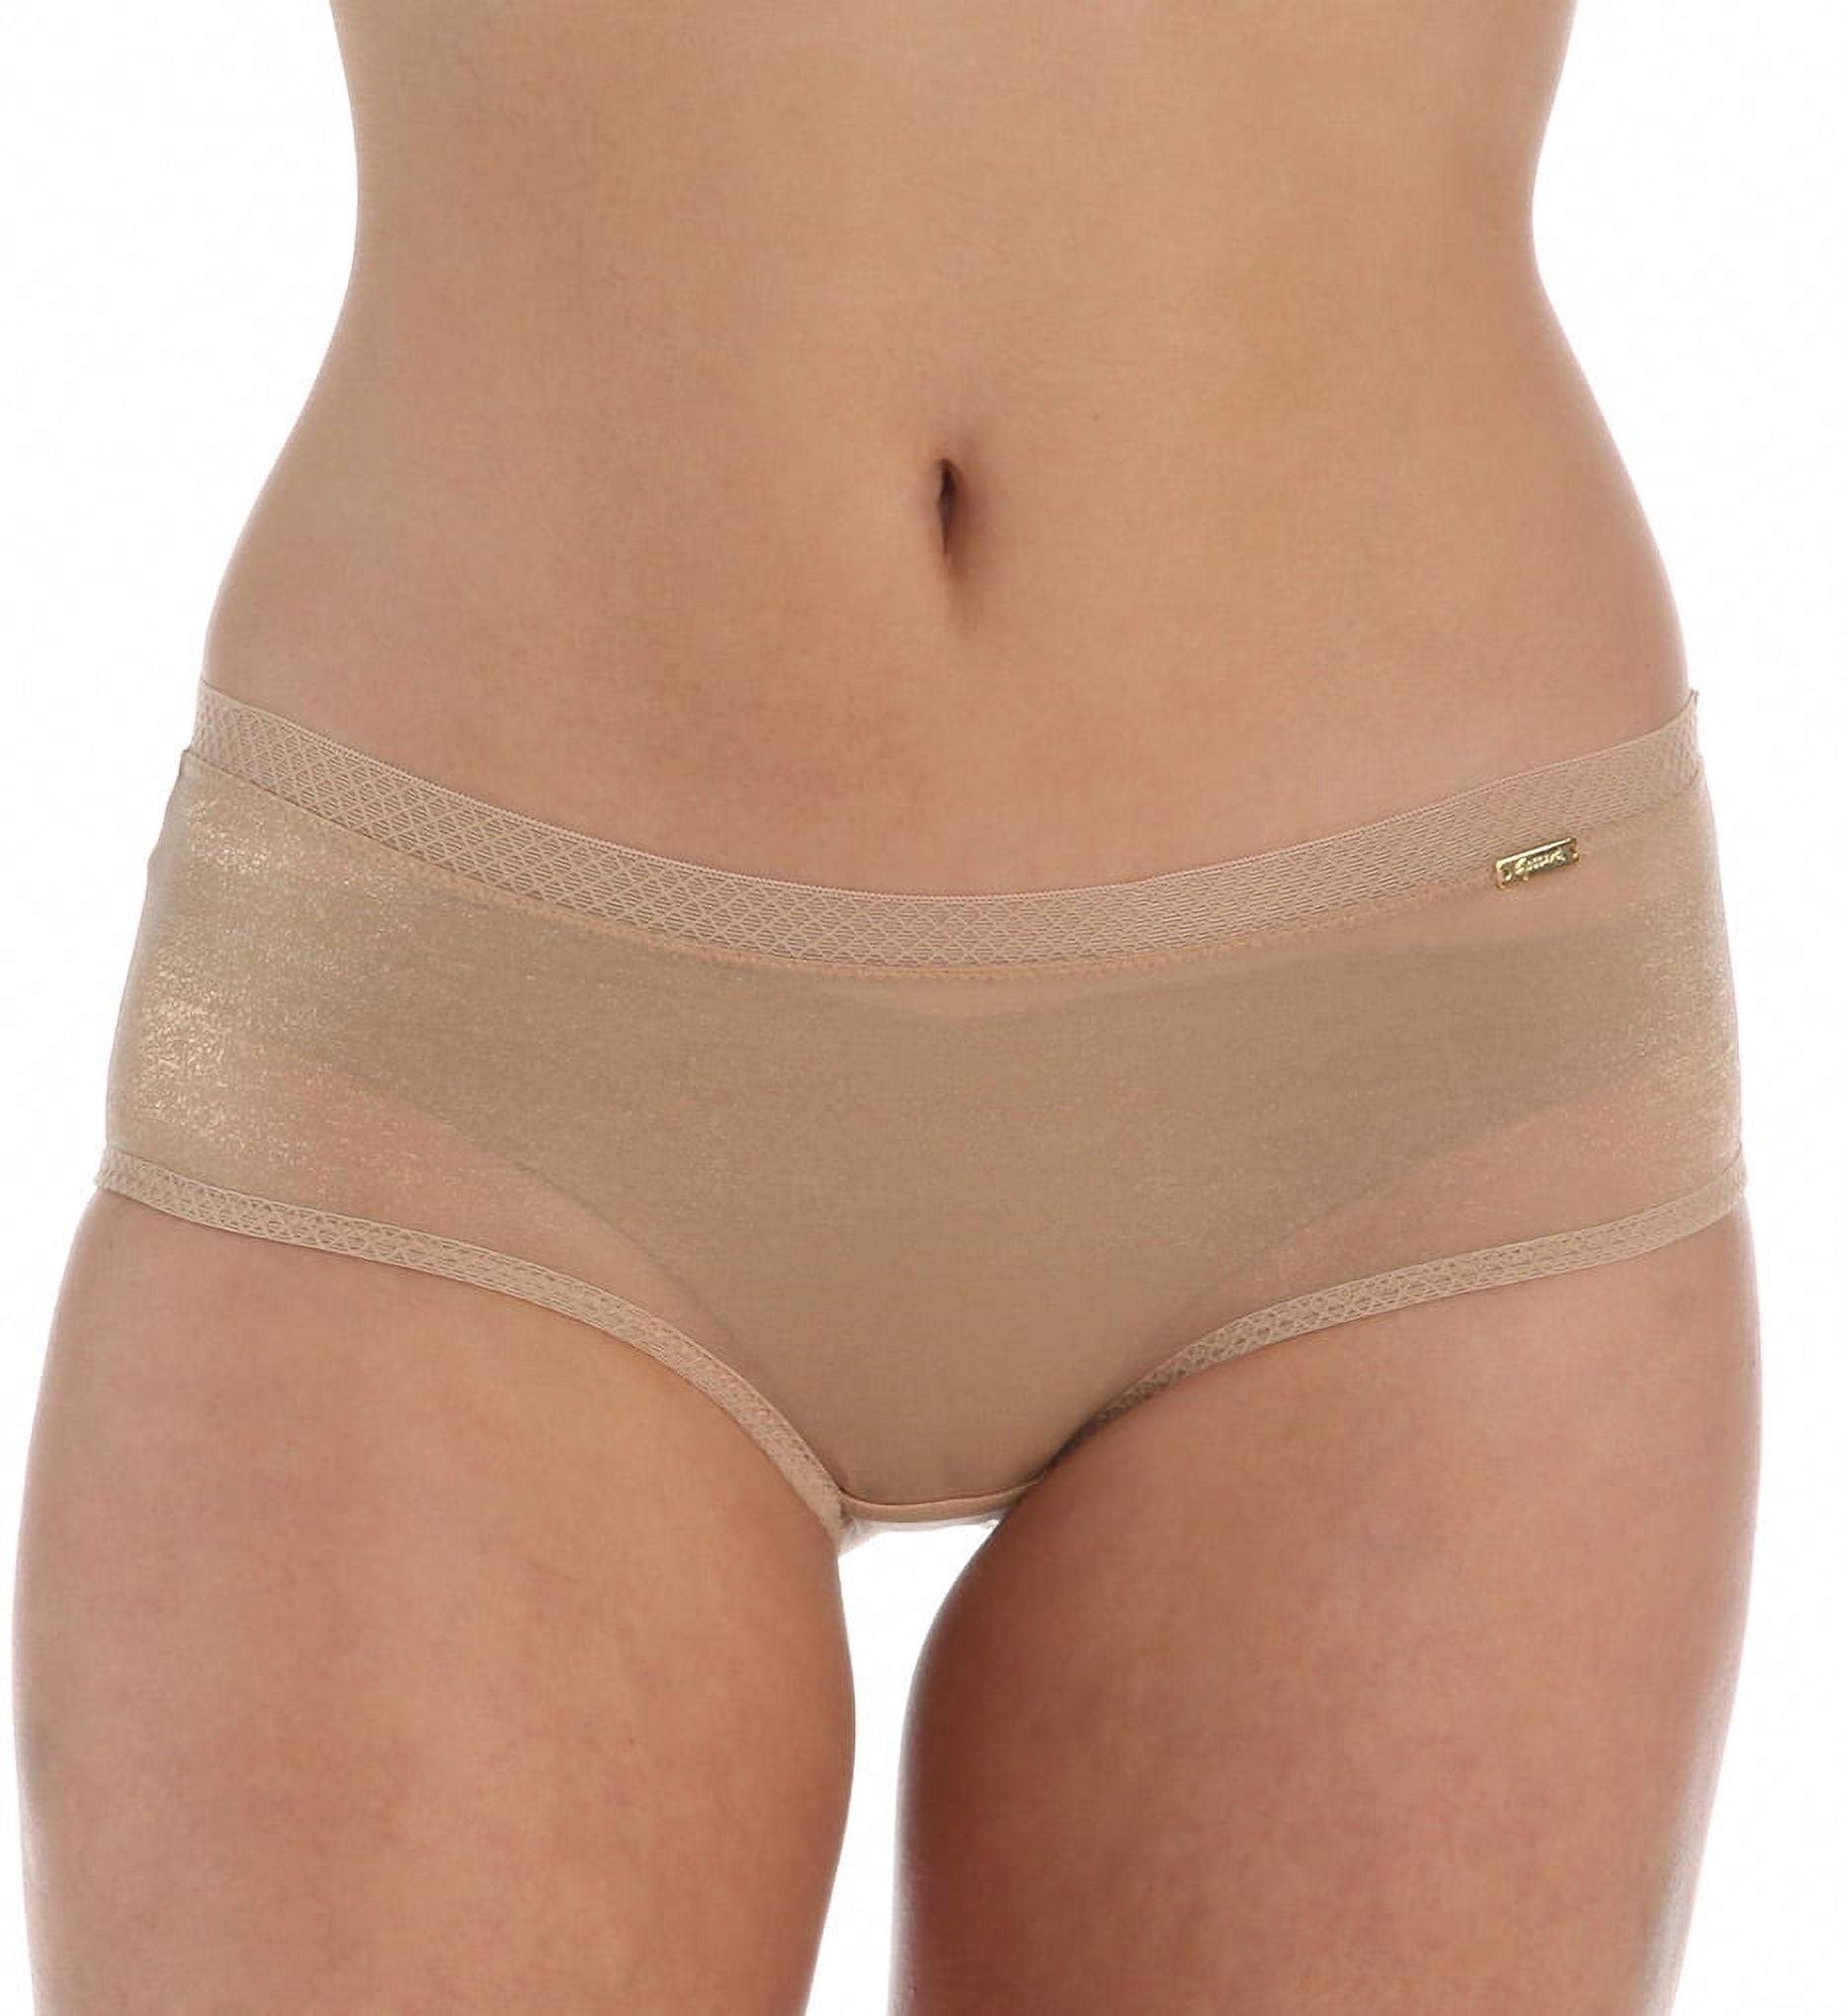 Sheer See Through Shorts Panty New Gossard Lingerie Glossies